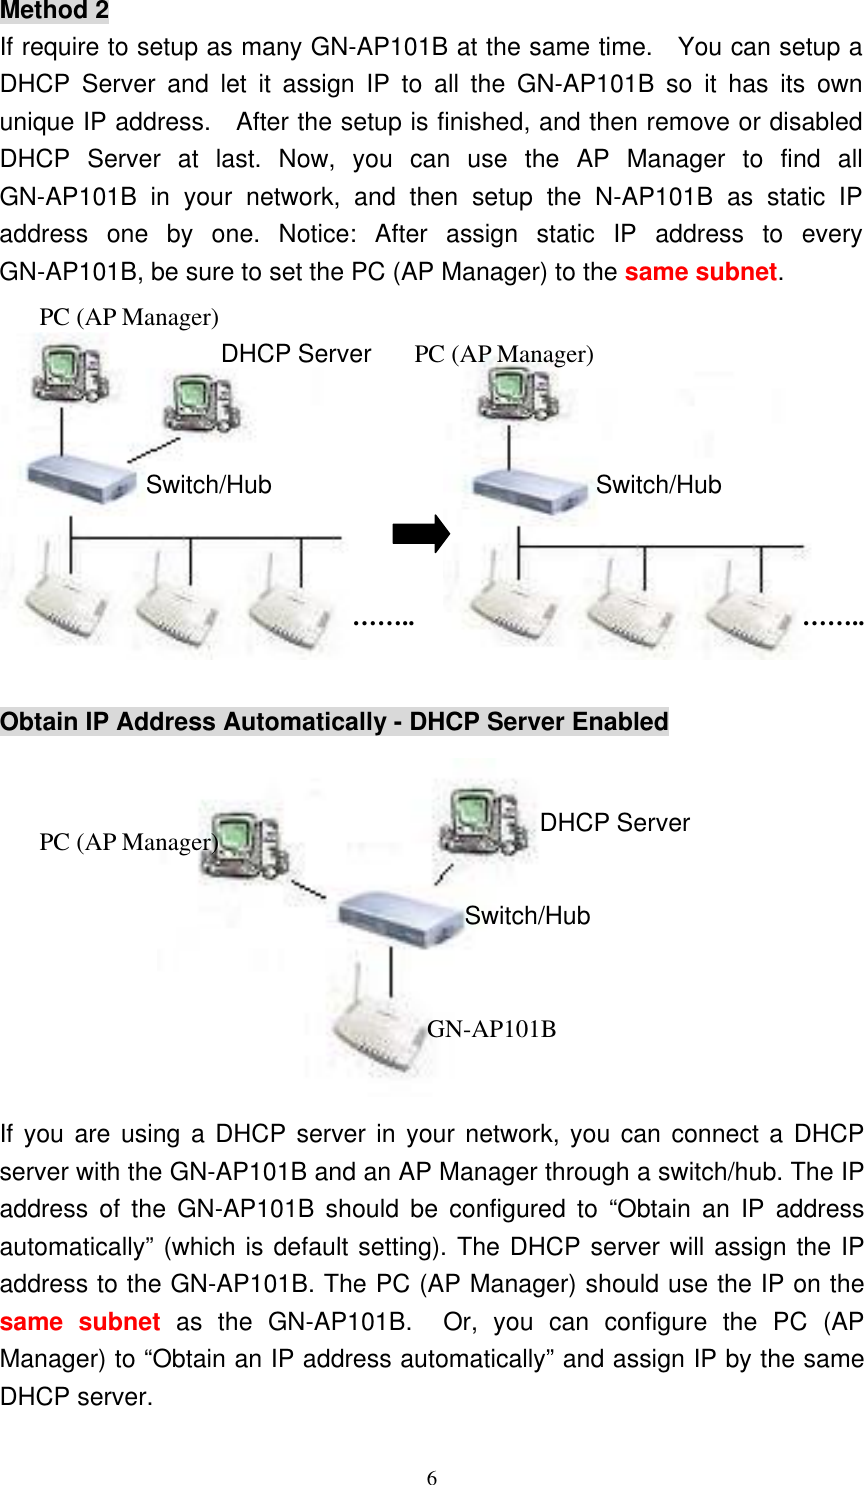 6  Method 2 If require to setup as many GN-AP101B at the same time.   You can setup a DHCP Server and let it assign IP to all the GN-AP101B so it has its own unique IP address.    After the setup is finished, and then remove or disabled DHCP Server at last. Now, you can use the AP Manager to find all GN-AP101B in your network, and then setup the N-AP101B as static IP address one by one. Notice: After assign static IP address to every GN-AP101B, be sure to set the PC (AP Manager) to the same subnet.             Obtain IP Address Automatically - DHCP Server Enabled  If you are using a DHCP server in your network, you can connect a DHCP server with the GN-AP101B and an AP Manager through a switch/hub. The IP address of the GN-AP101B should be configured to “Obtain an IP address automatically” (which is default setting). The DHCP server will assign the IP address to the GN-AP101B. The PC (AP Manager) should use the IP on the same subnet as the GN-AP101B.  Or, you can configure the PC (AP Manager) to “Obtain an IP address automatically” and assign IP by the same DHCP server. Switch/Hub DHCP Server GN-AP101BPC (AP Manager)  PC (AP Manager)  DHCP Server…….. Switch/Hub …….. PC (AP Manager)  Switch/Hub 